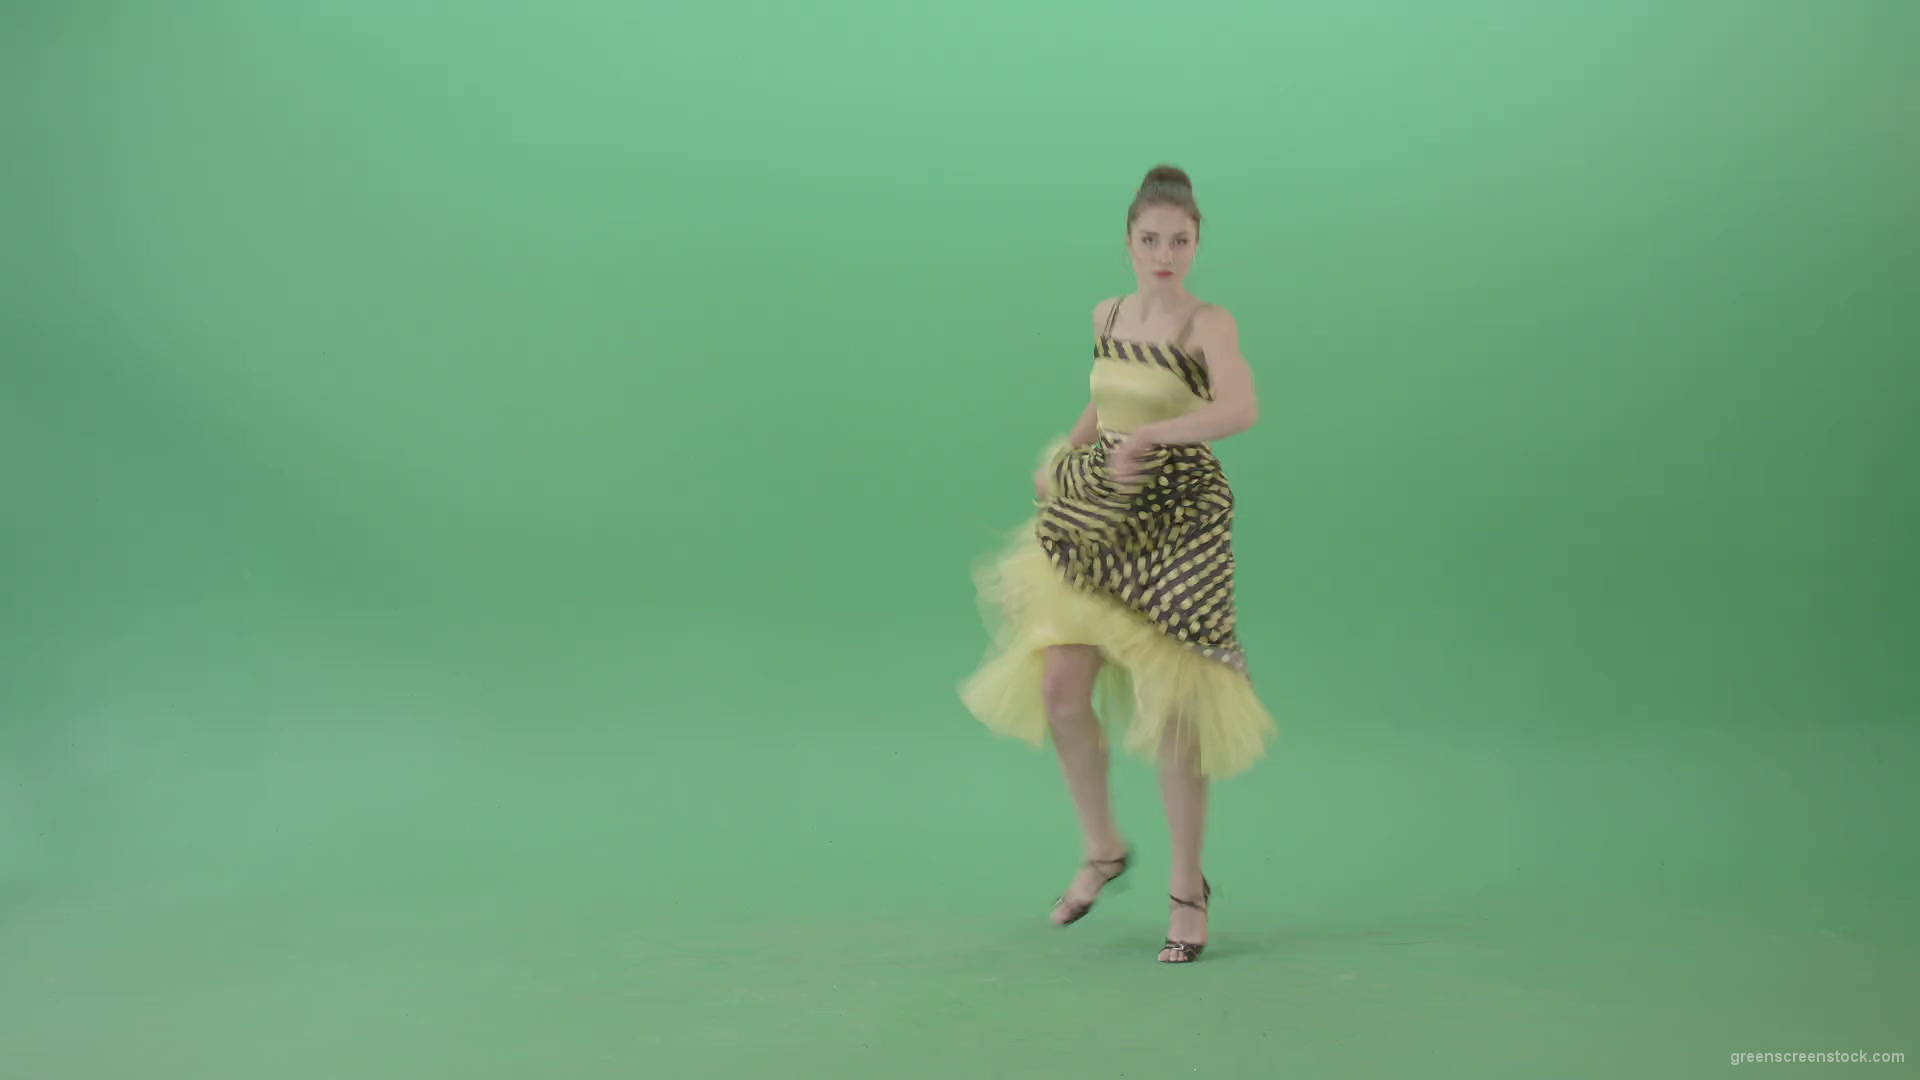 Beautiful-Woman-dancing-Boogie-woogie-and-jumping-in-Jazz-dance-isolated-on-Green-Screen-4K-Video-Footage-1920_001 Green Screen Stock